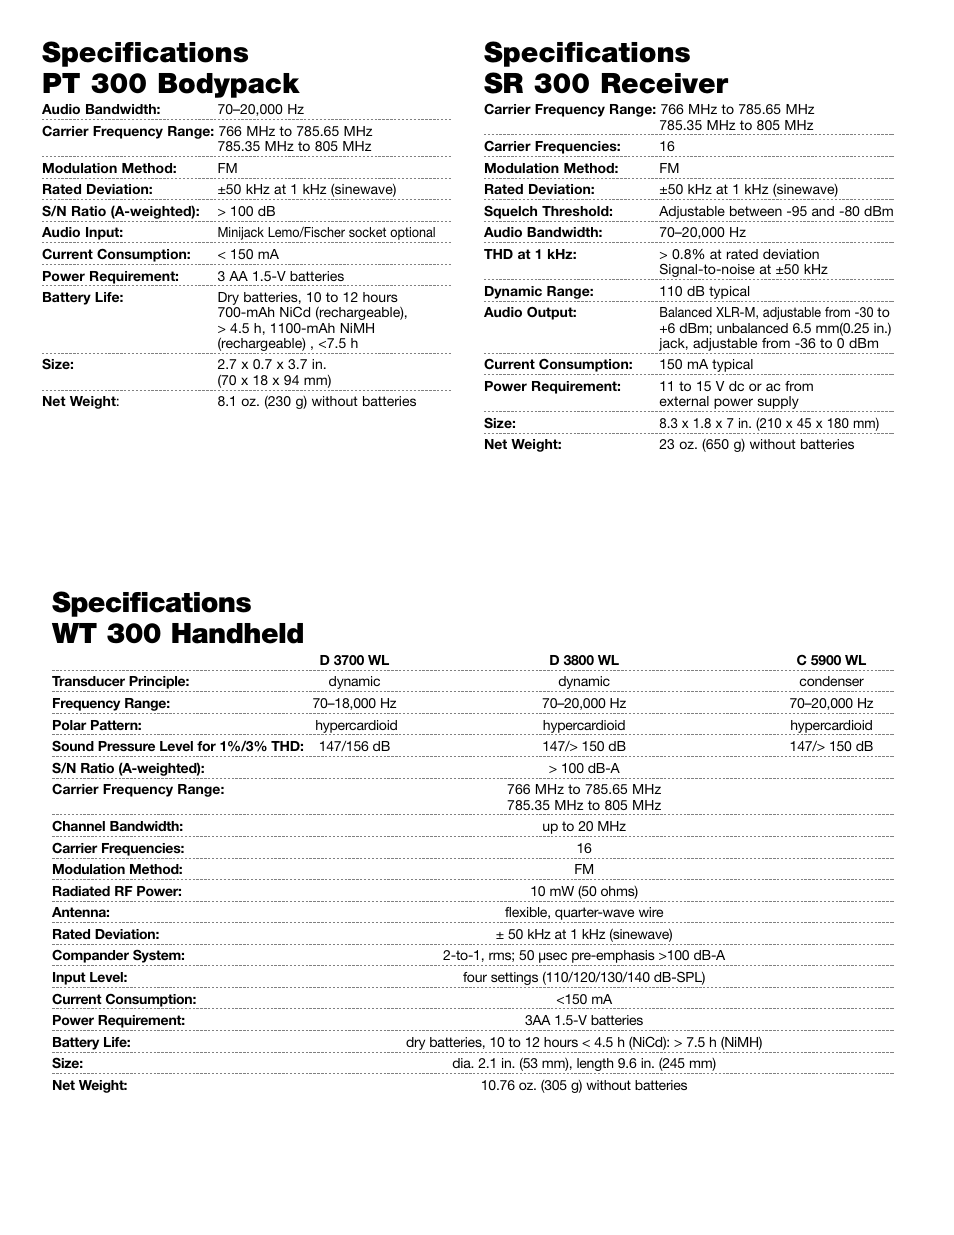 Specifications pt 300 bodypack, Specifications sr 300 receiver,  Specifications wt 300 handheld | AKG Acoustics WMS 300 User Manual | Page 2  / 3 | Original mode